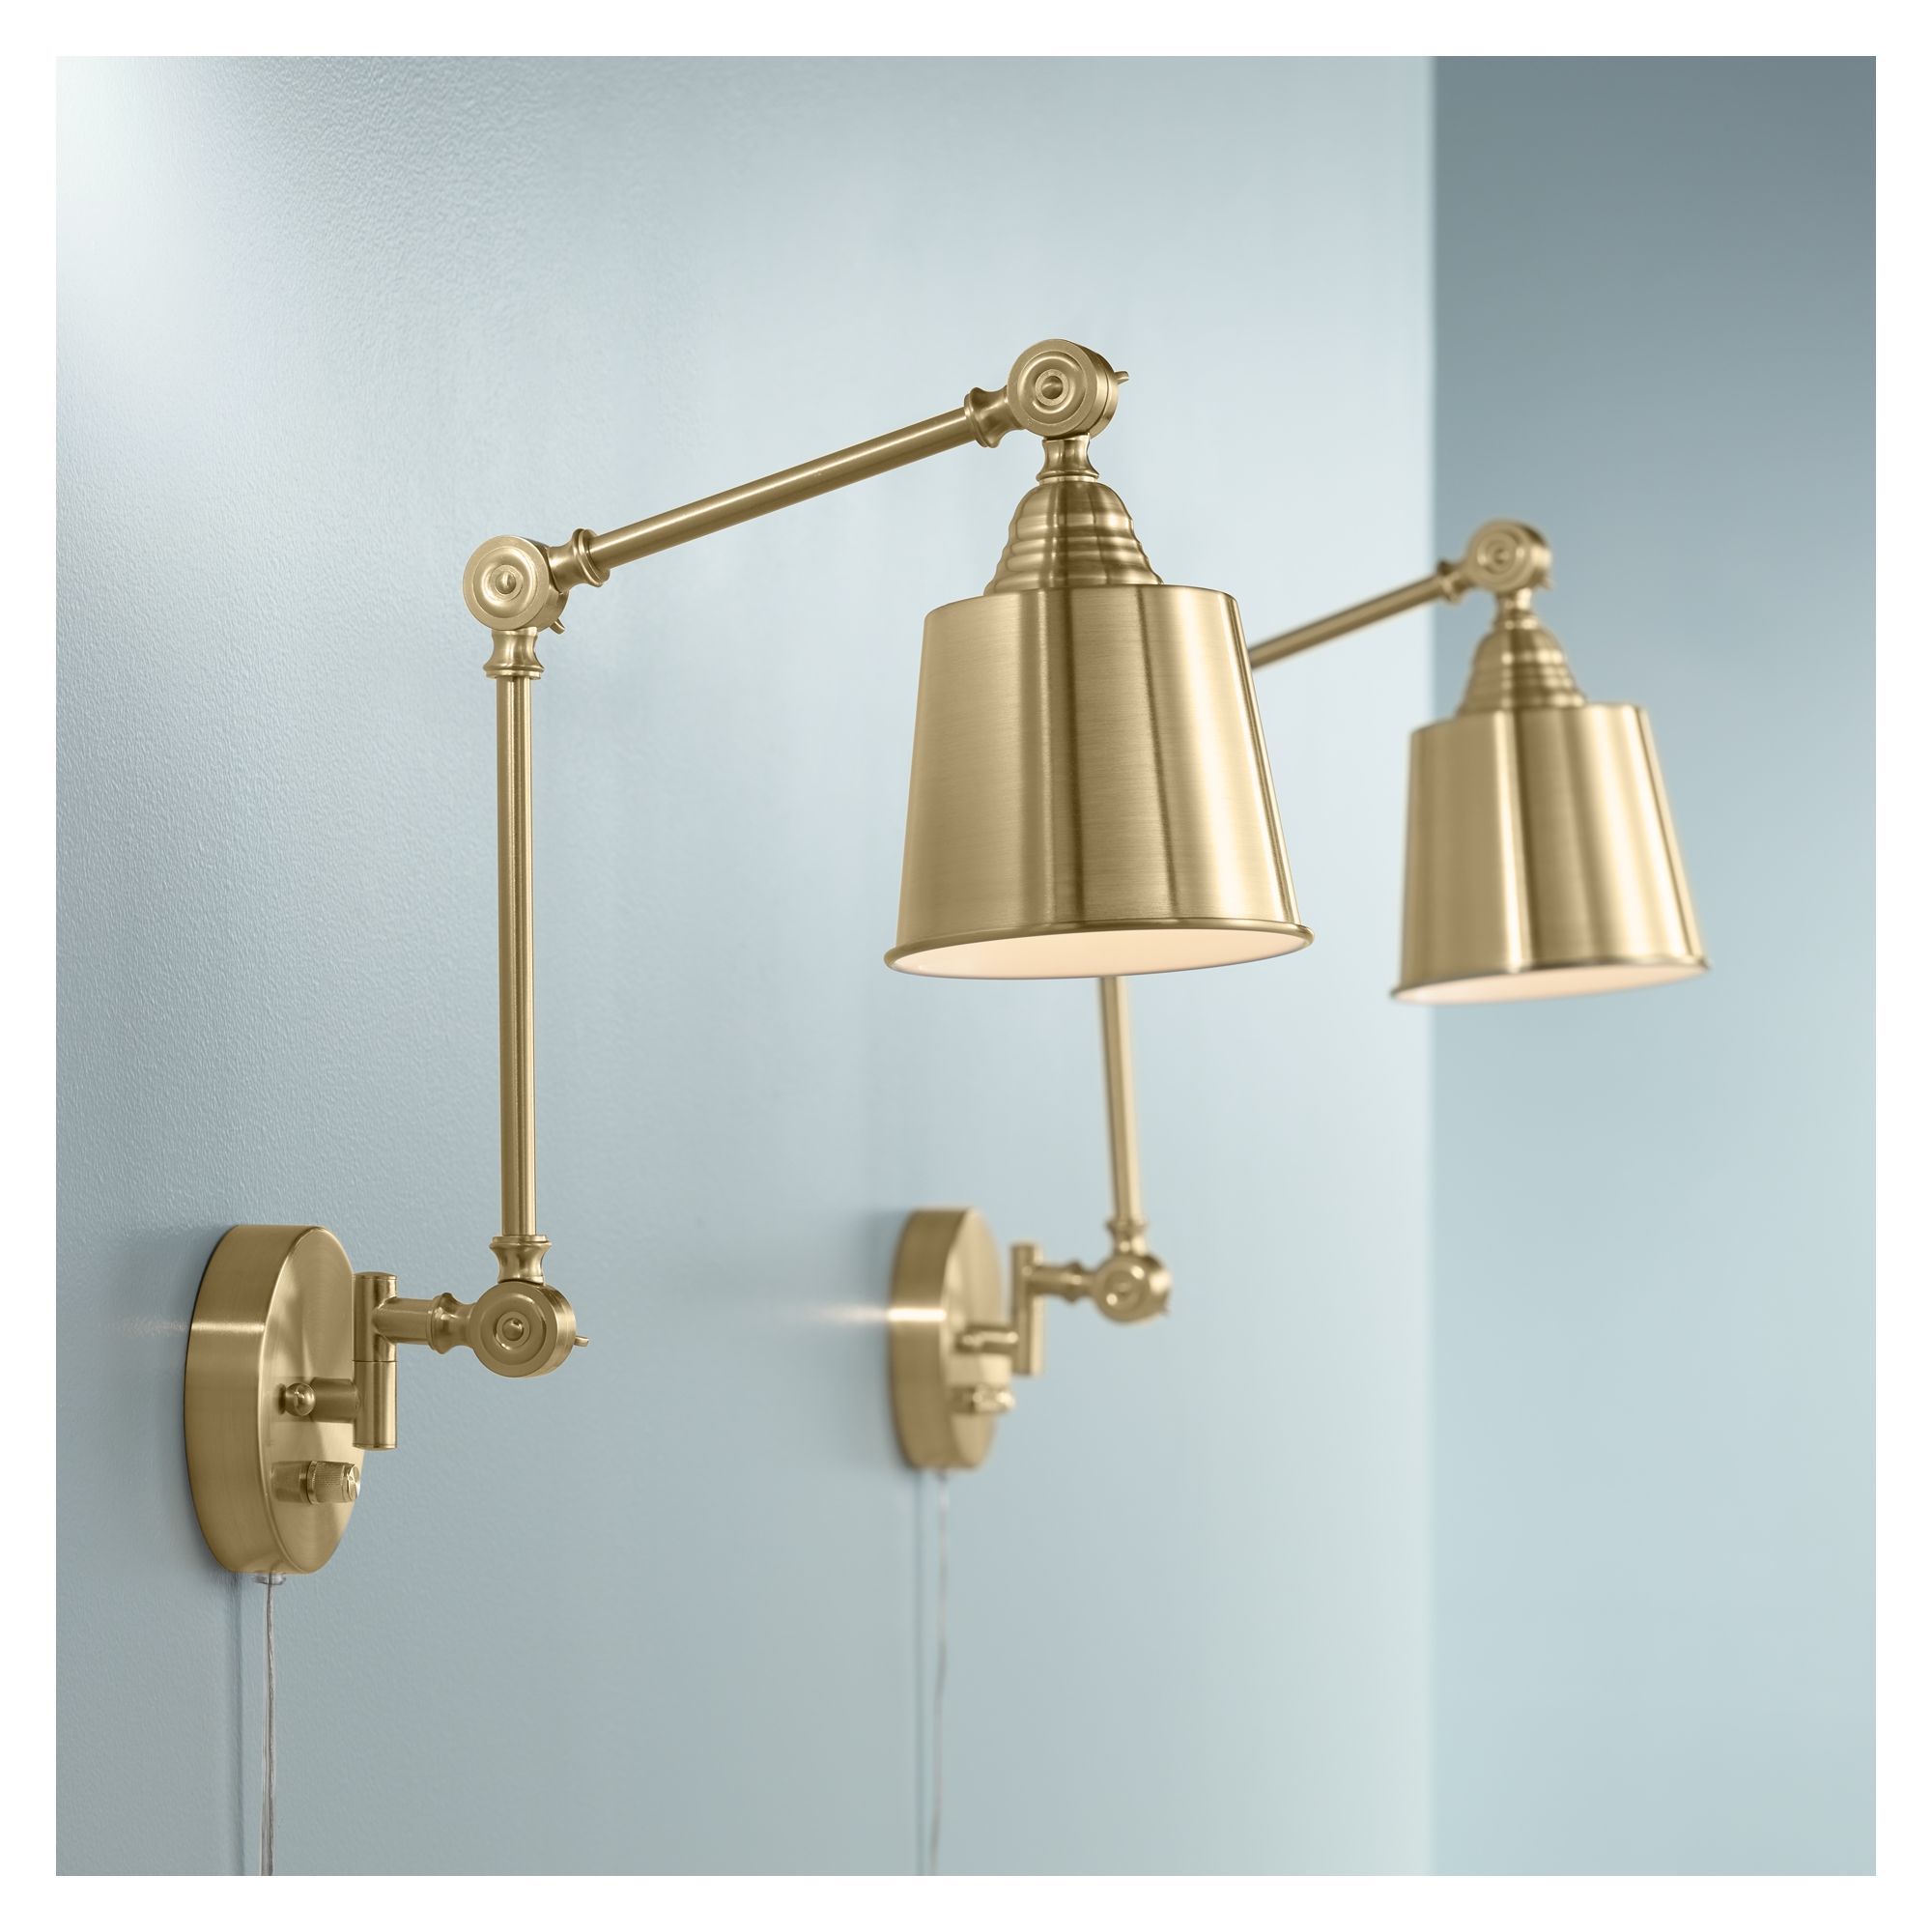 360 Lighting Set of 2 Mendes Antique Brass Down-Light Plug-In Wall Lamps | Walmart (US)